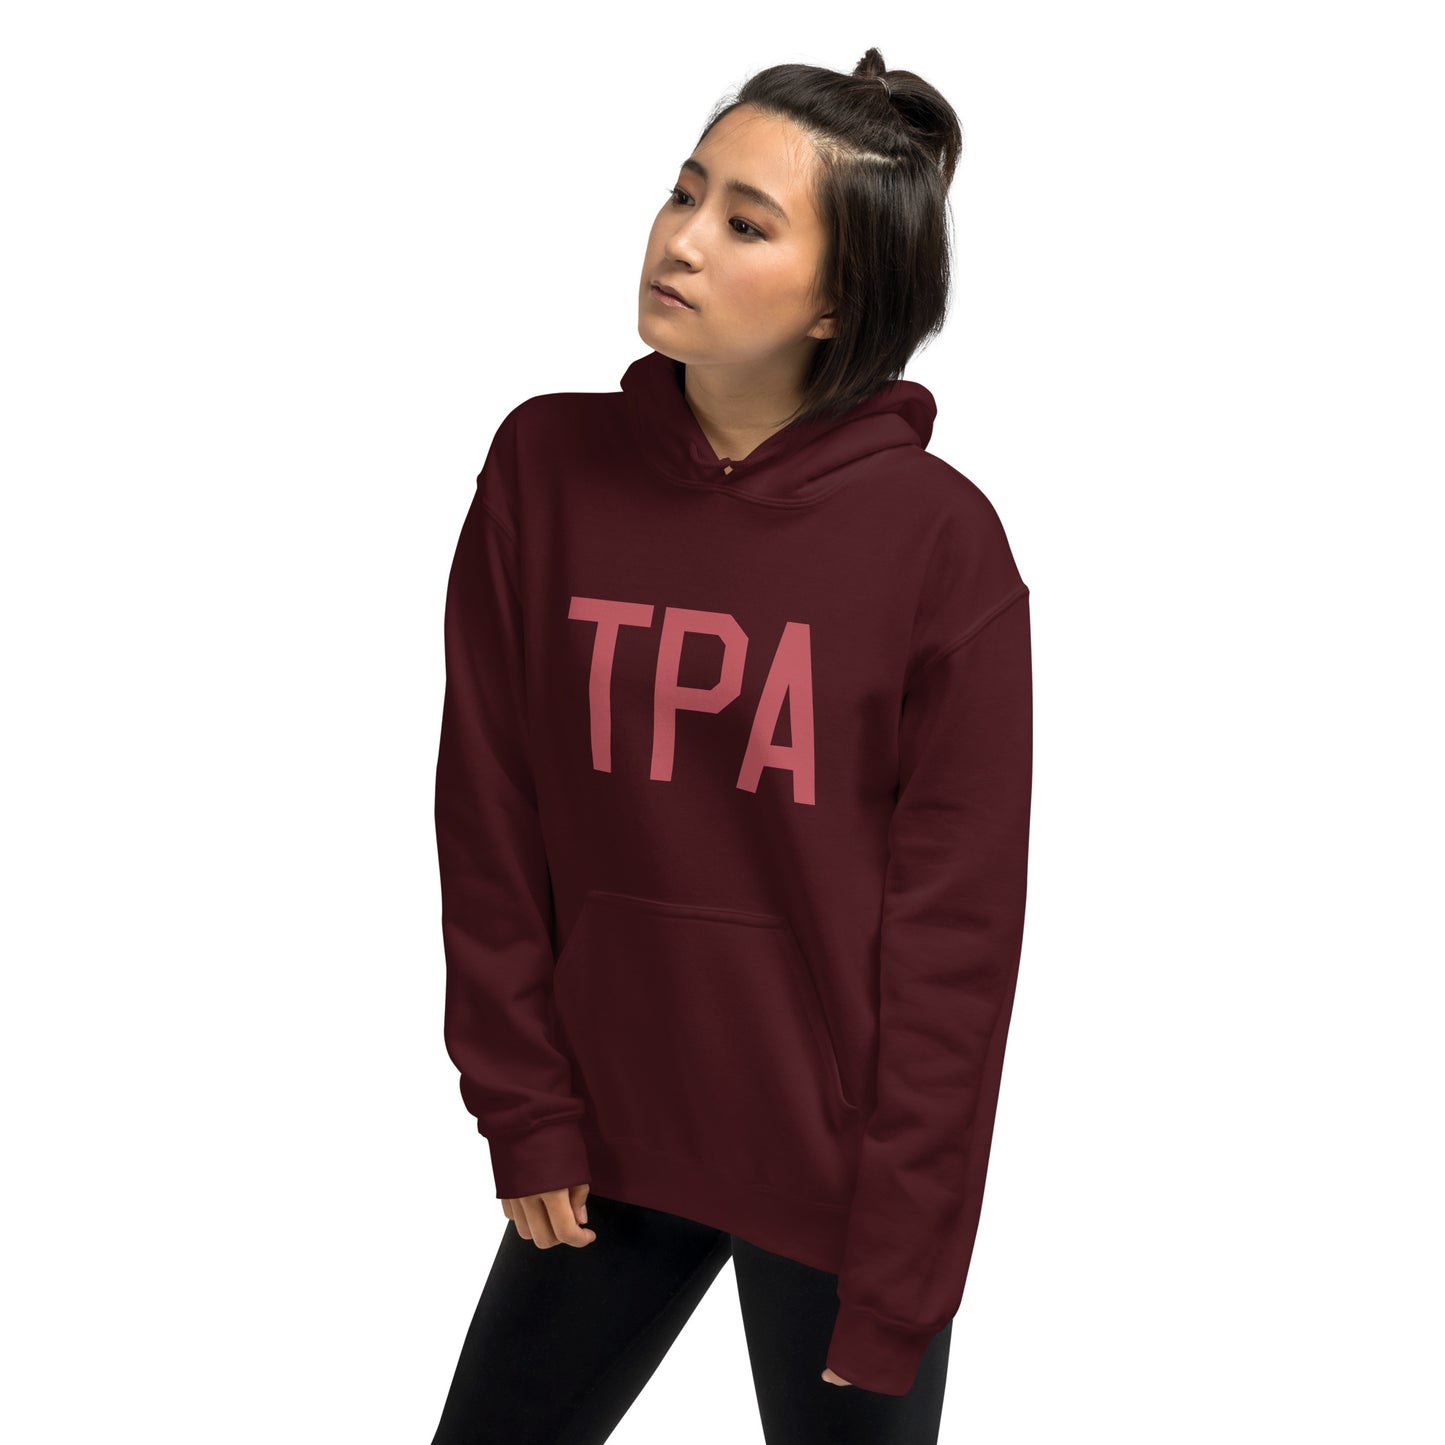 Aviation Enthusiast Hoodie - Deep Pink Graphic • TPA Tampa • YHM Designs - Image 10